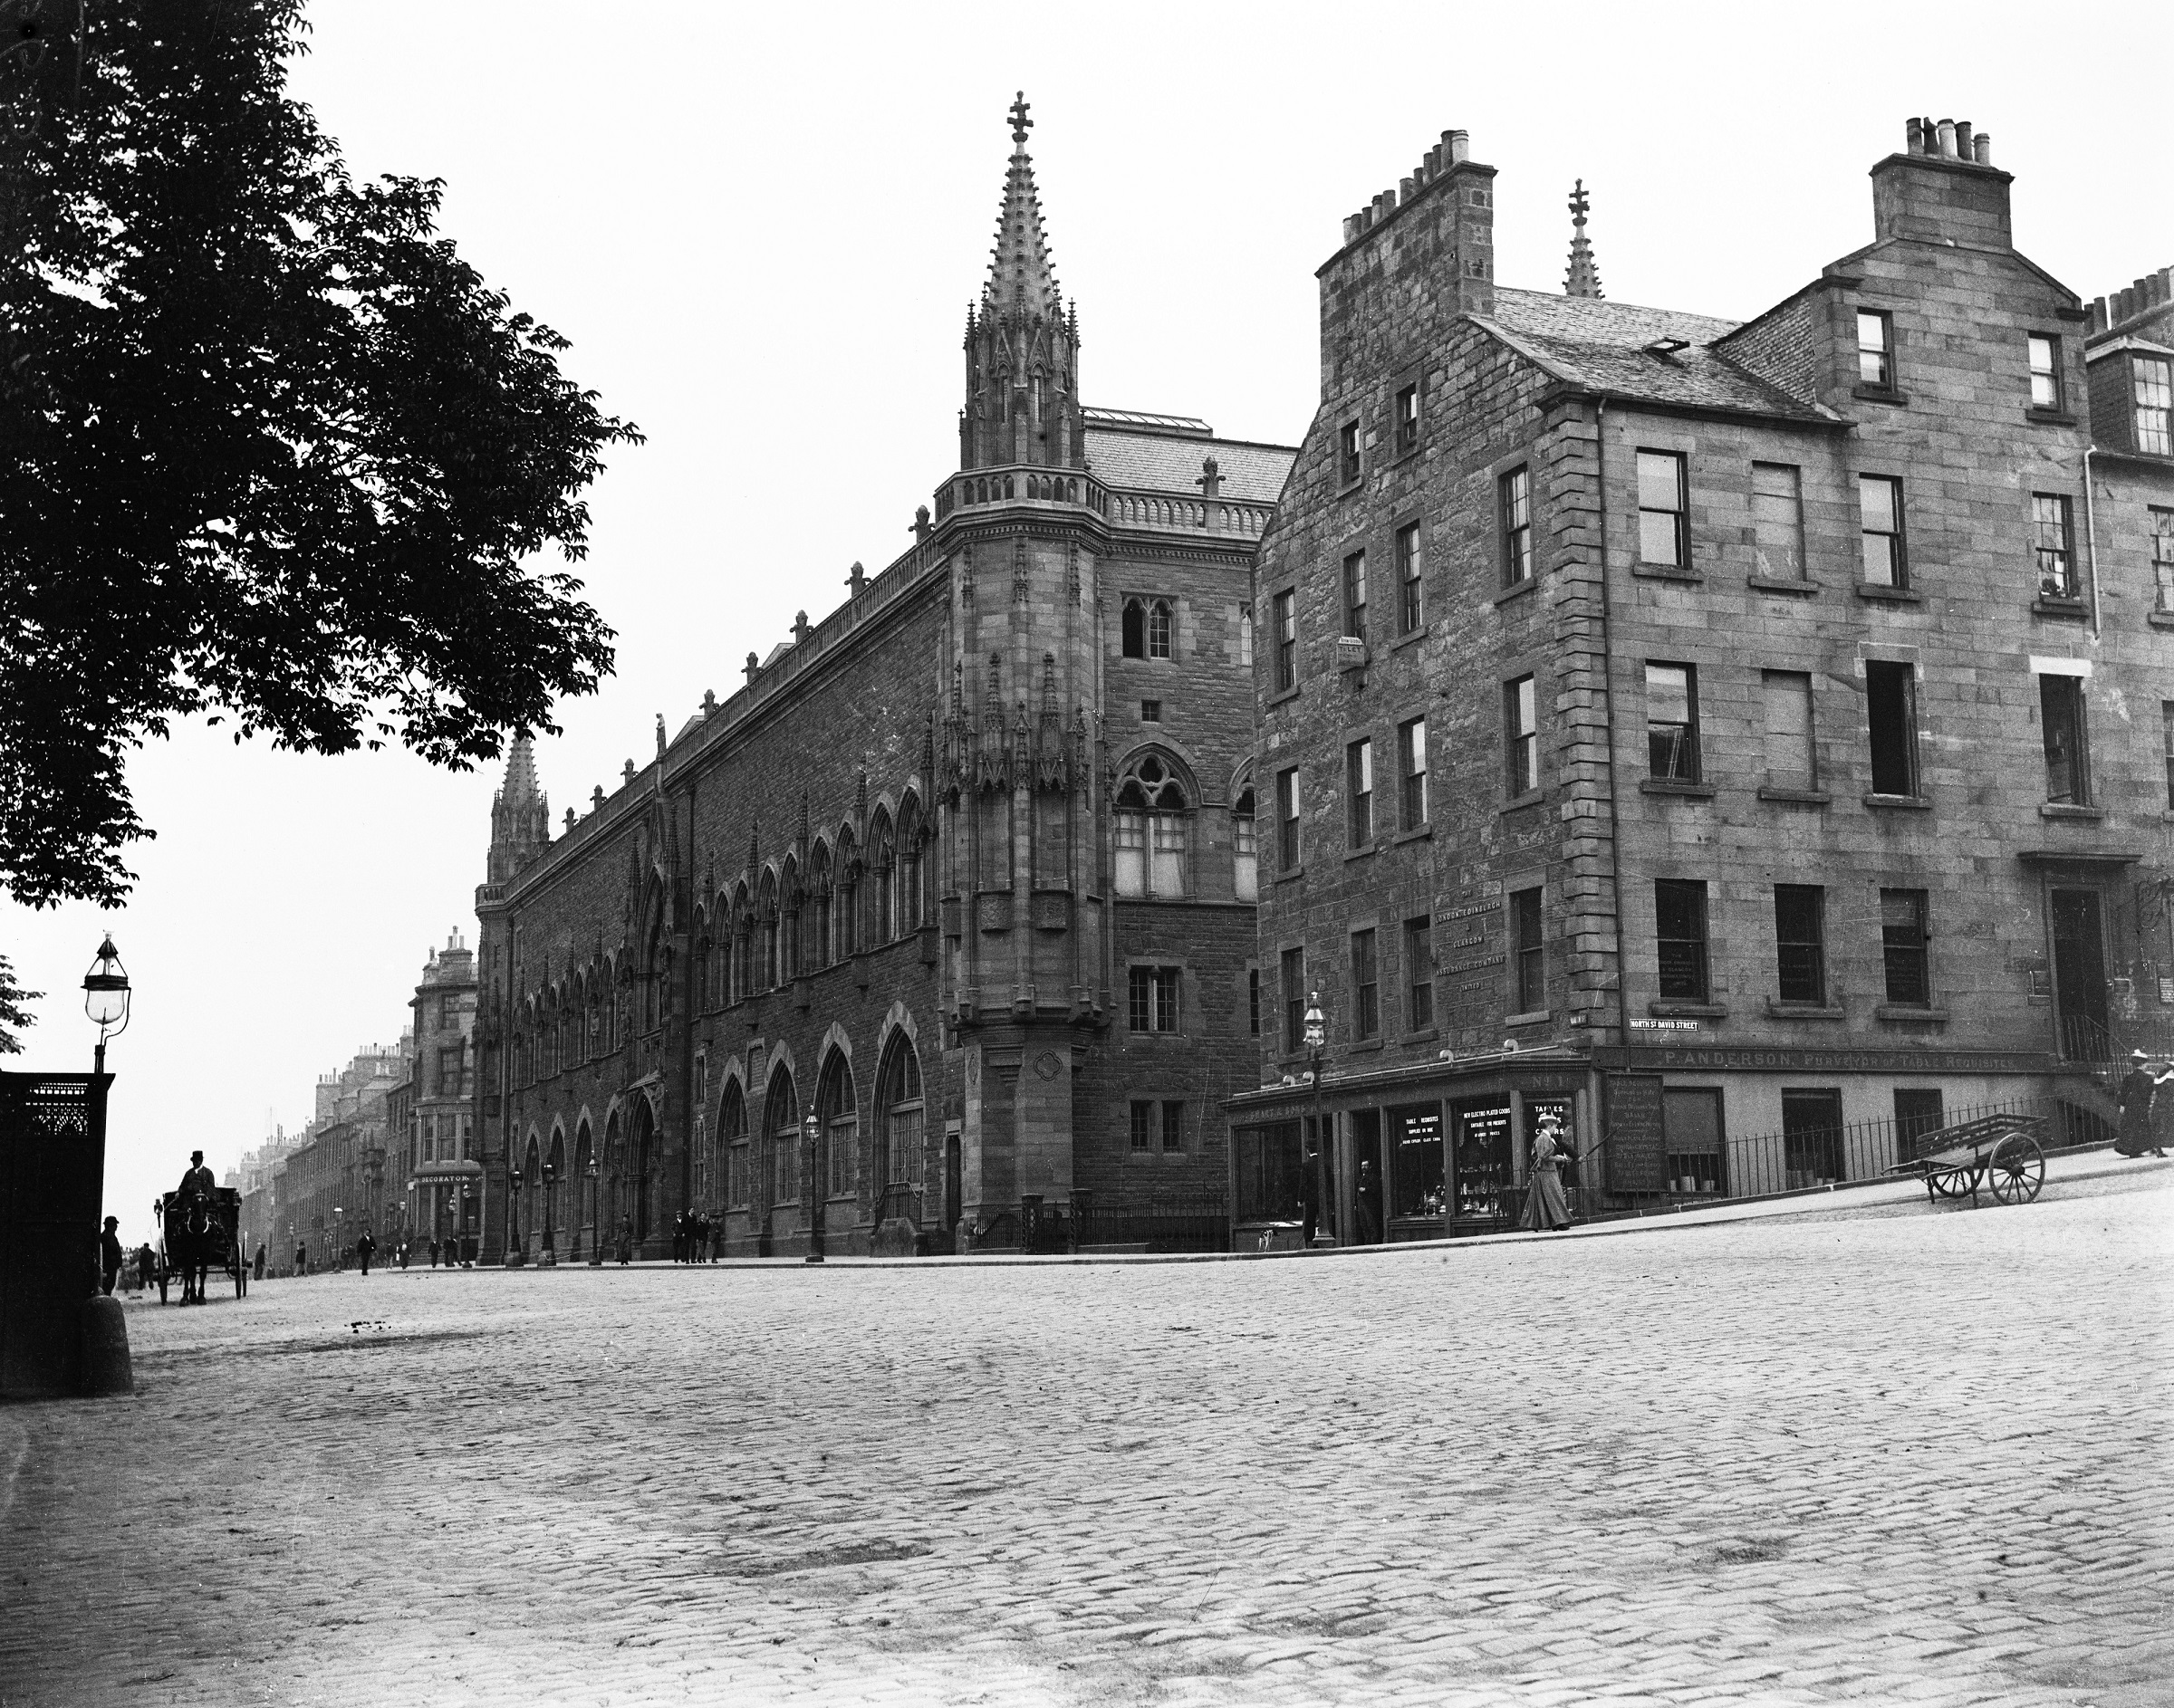 A black and white archive photo showing the National gallery of Scotland building on Queen Street.